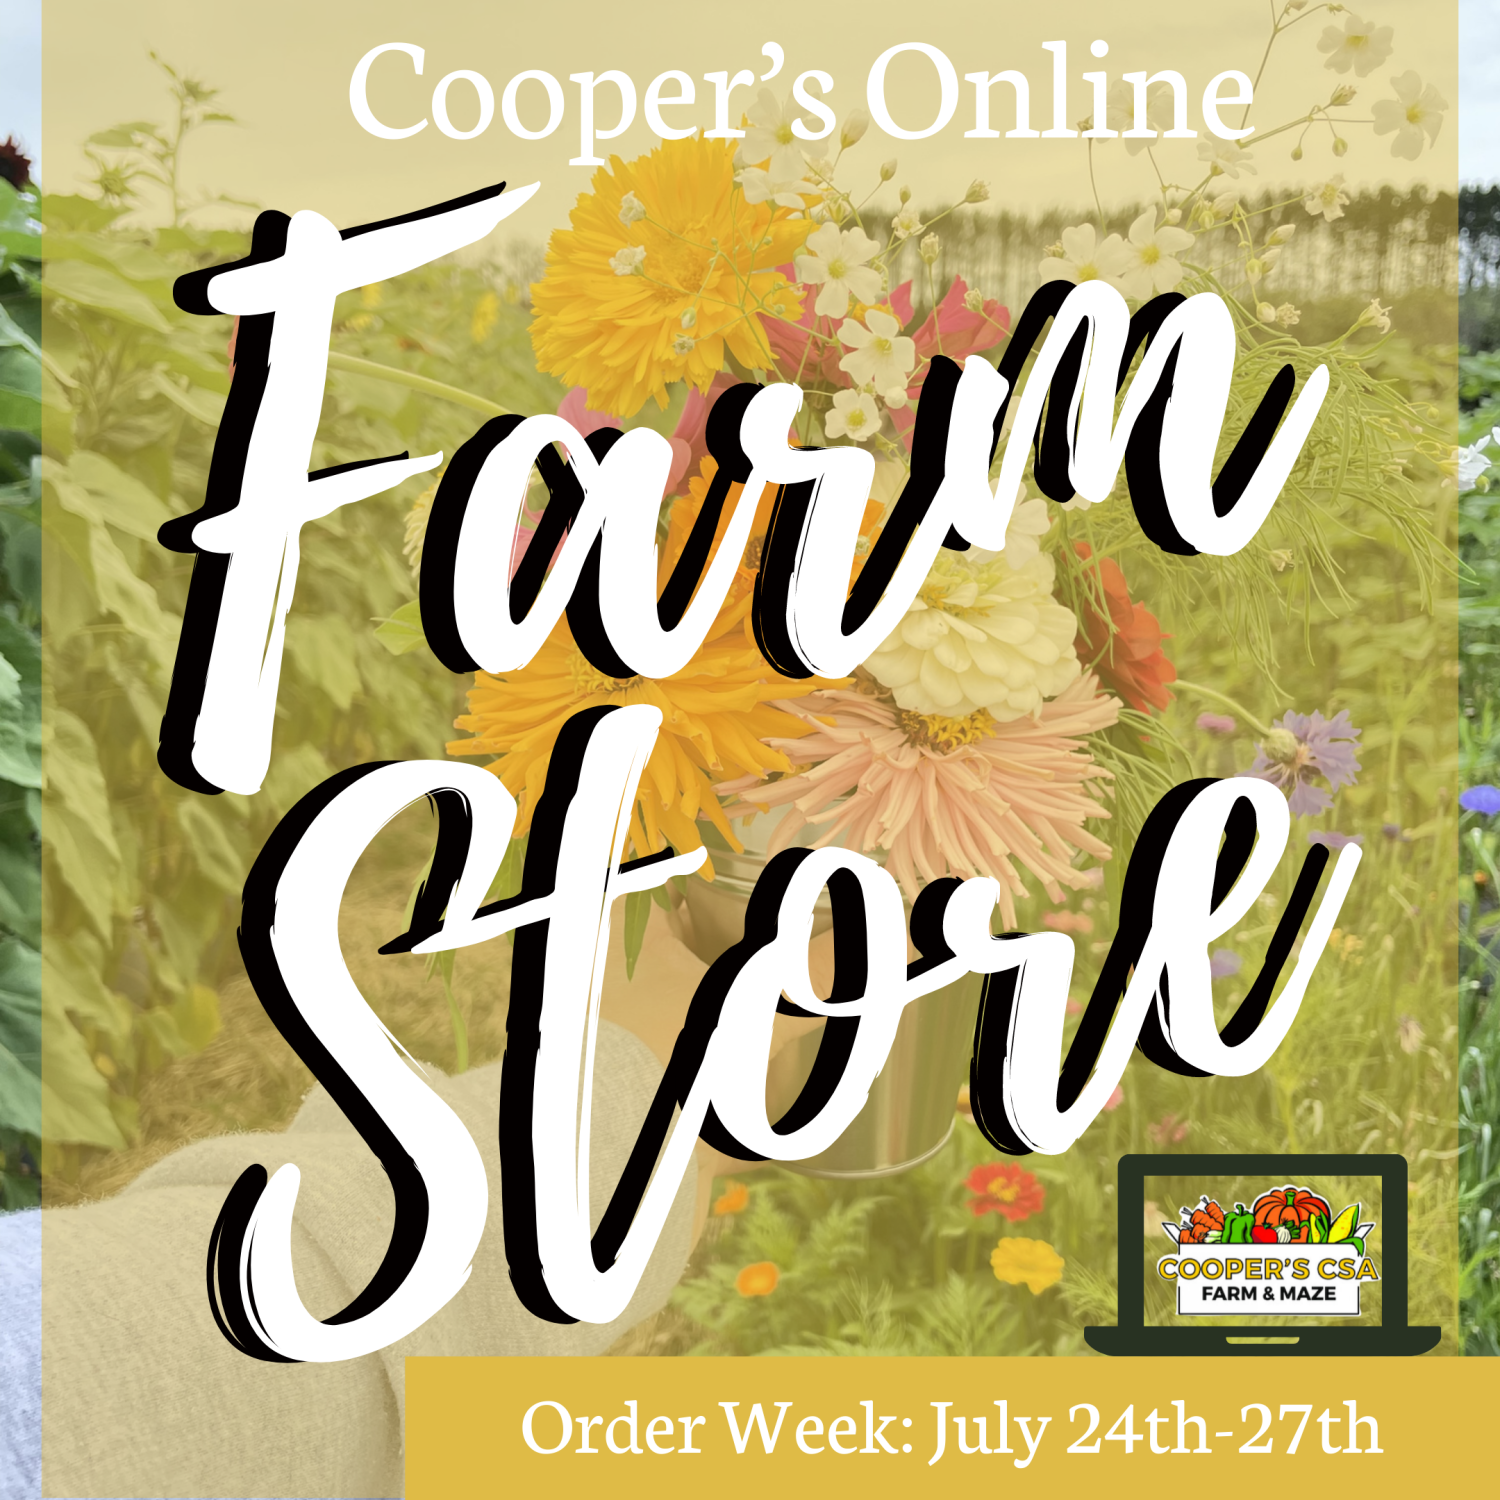 Previous Happening: Coopers CSA Online FarmStore- Order week July 24th-27th